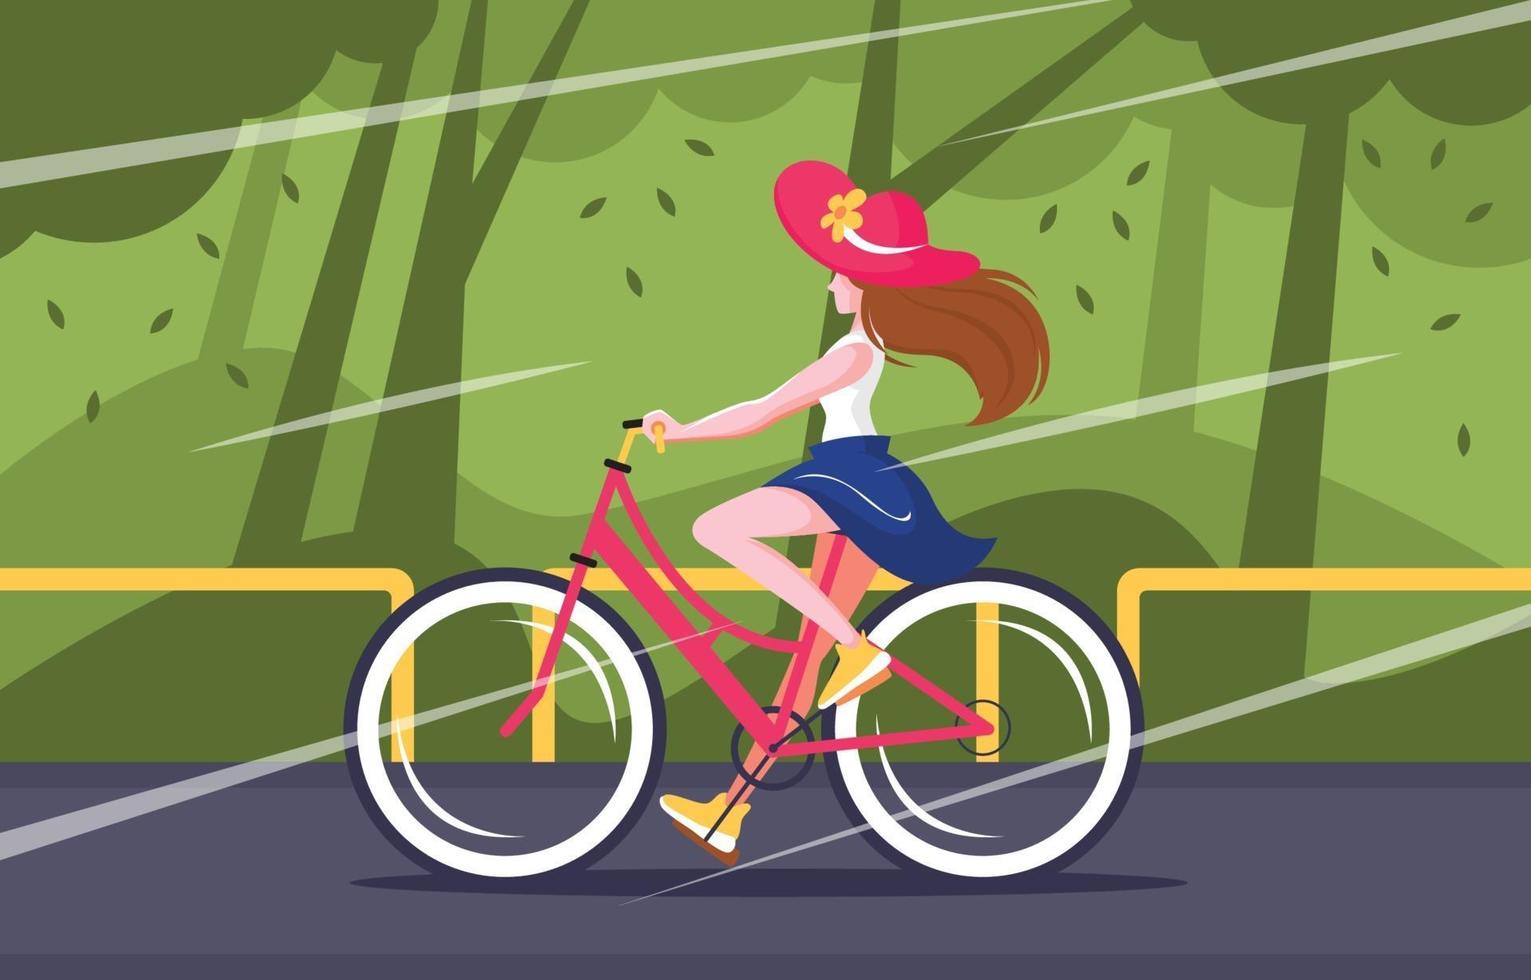 Beautiful Woman Riding Bicycle on the Road Bike vector